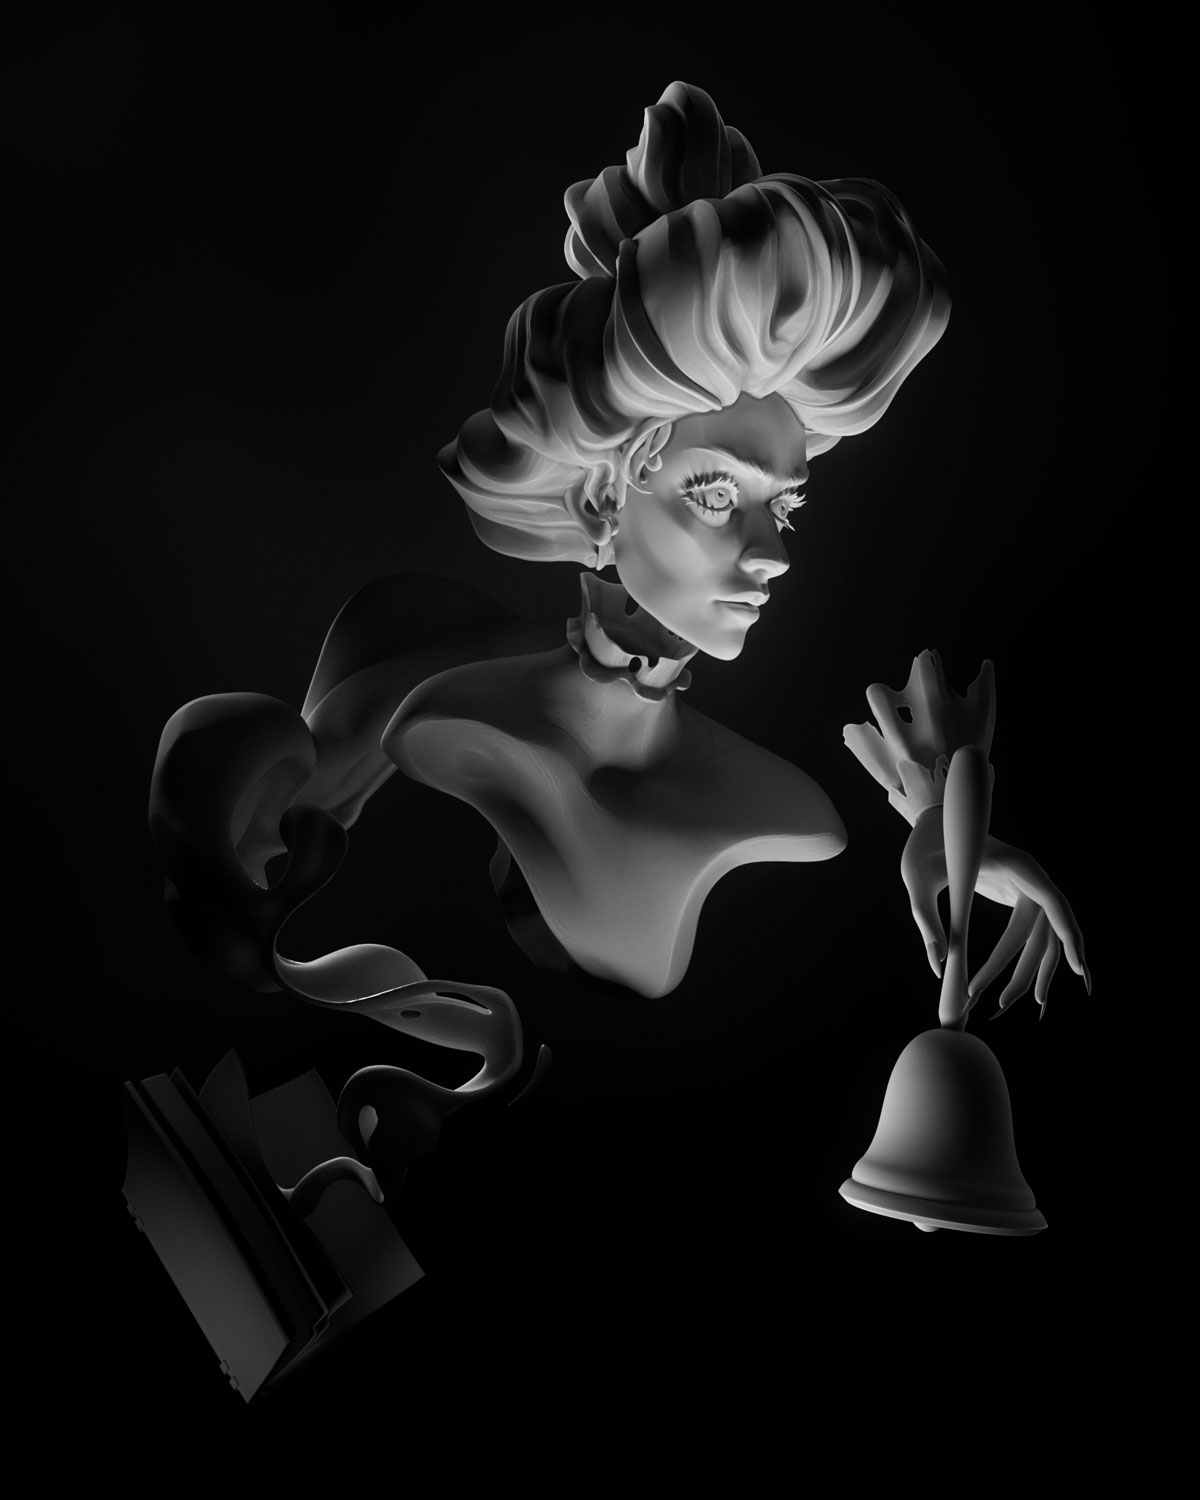 3D sculpture: the ghost of an Edwardian-era woman or Gibson Girl coming out of a book, holding a hand-bell.